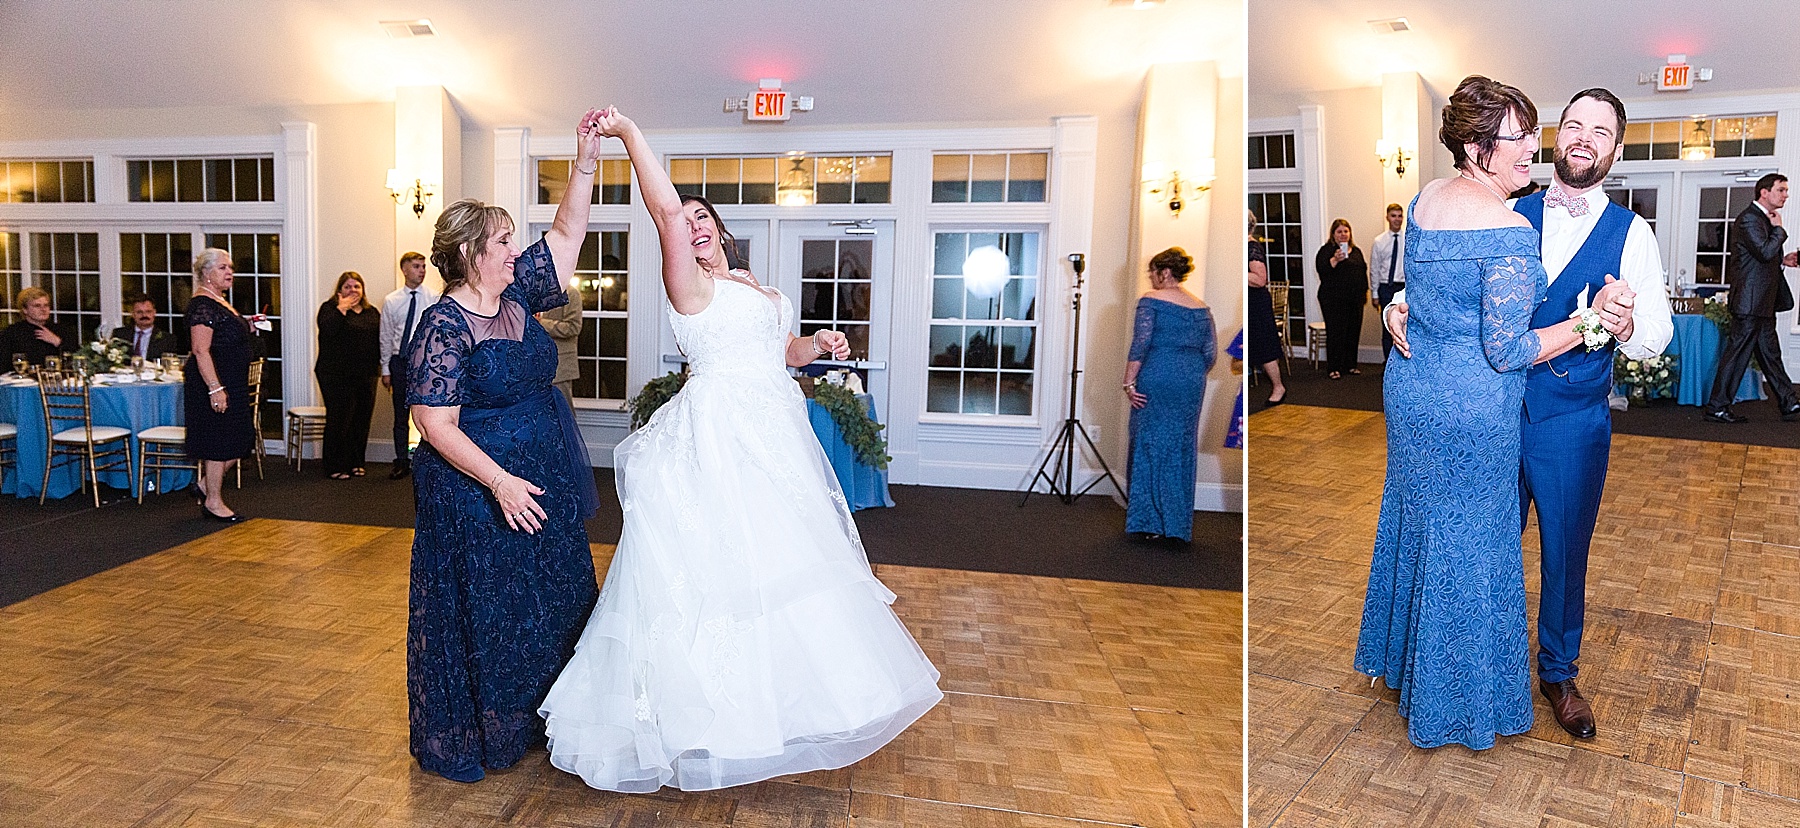 family dance at reception photographed by Alexandra Mandato Photography